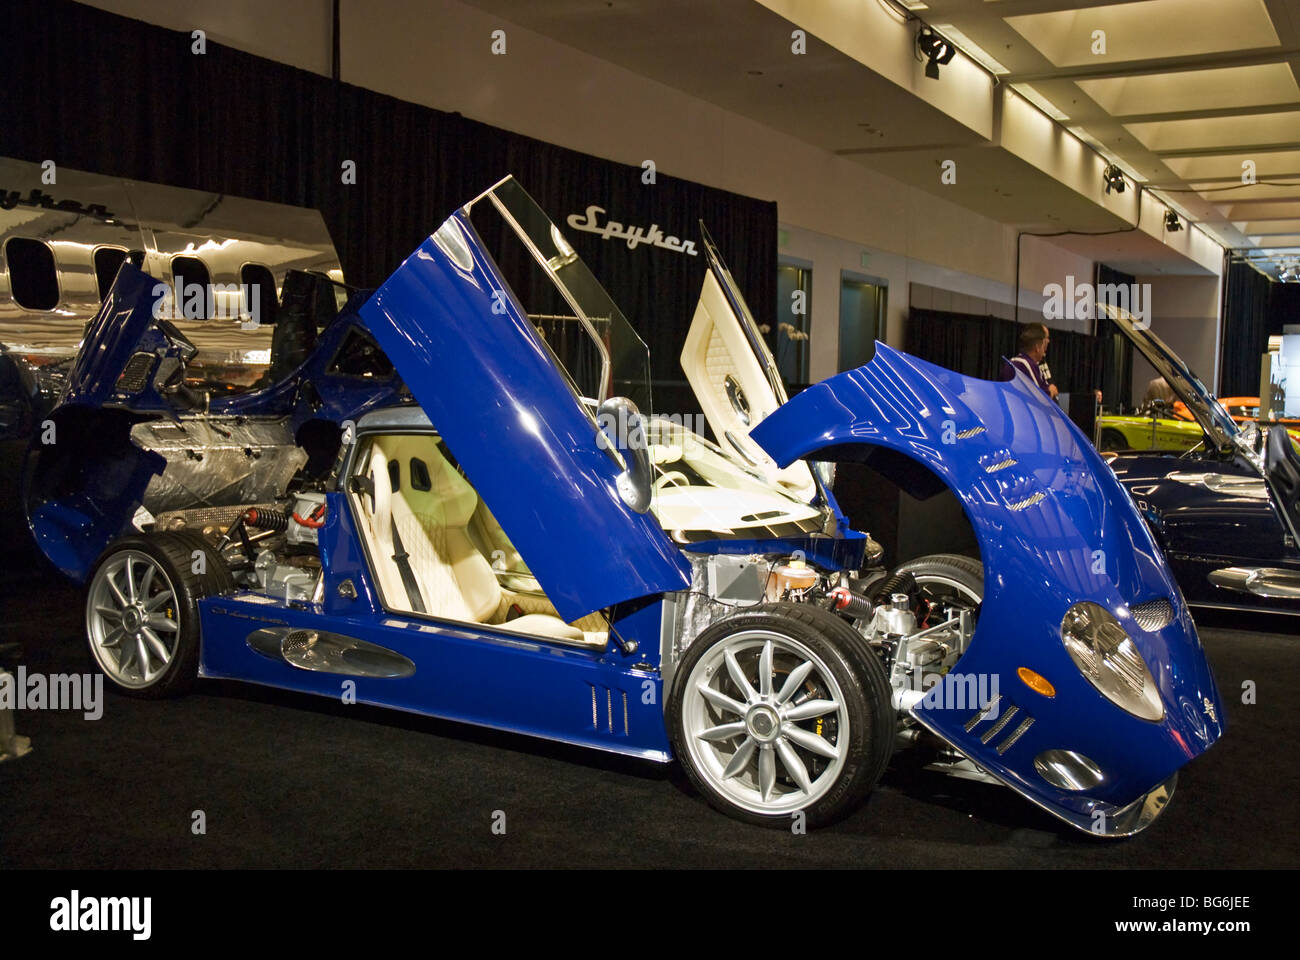 A Spyker at the 2009 LA Auto Show in the Los Angeles Convention Center, Los Angeles, California. Stock Photo